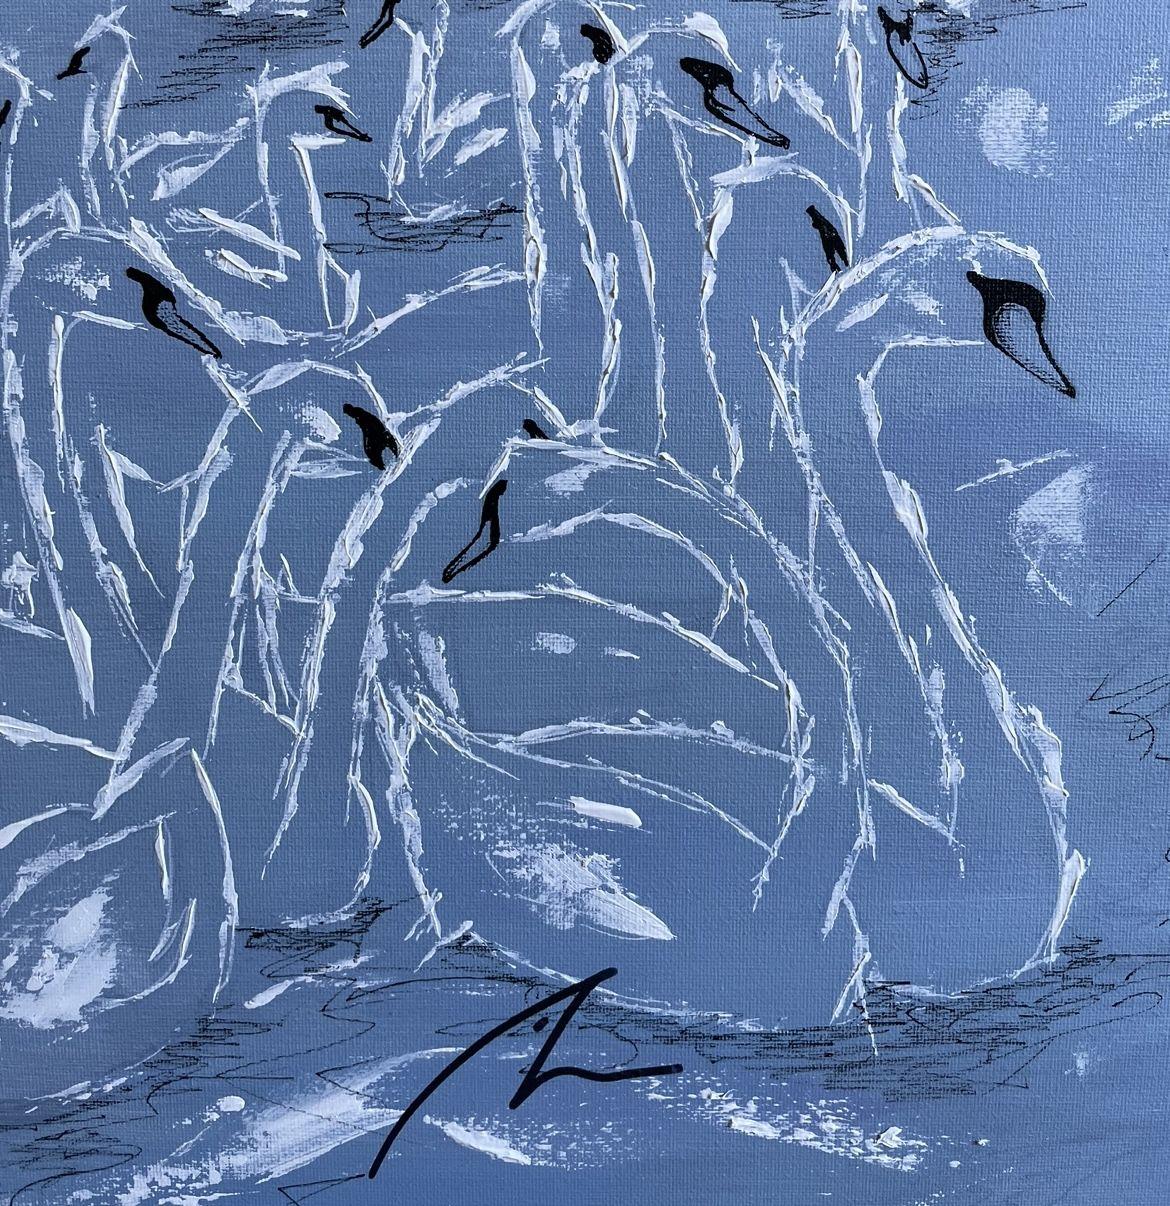 Flock is a depiction of the Charles bridge in Prague. The painting is done over a warm blue background. The bridge is drawn with pigment, the flock of white swans are done with rough strokes of a pallet knife.  :: Painting :: Expressionism :: This